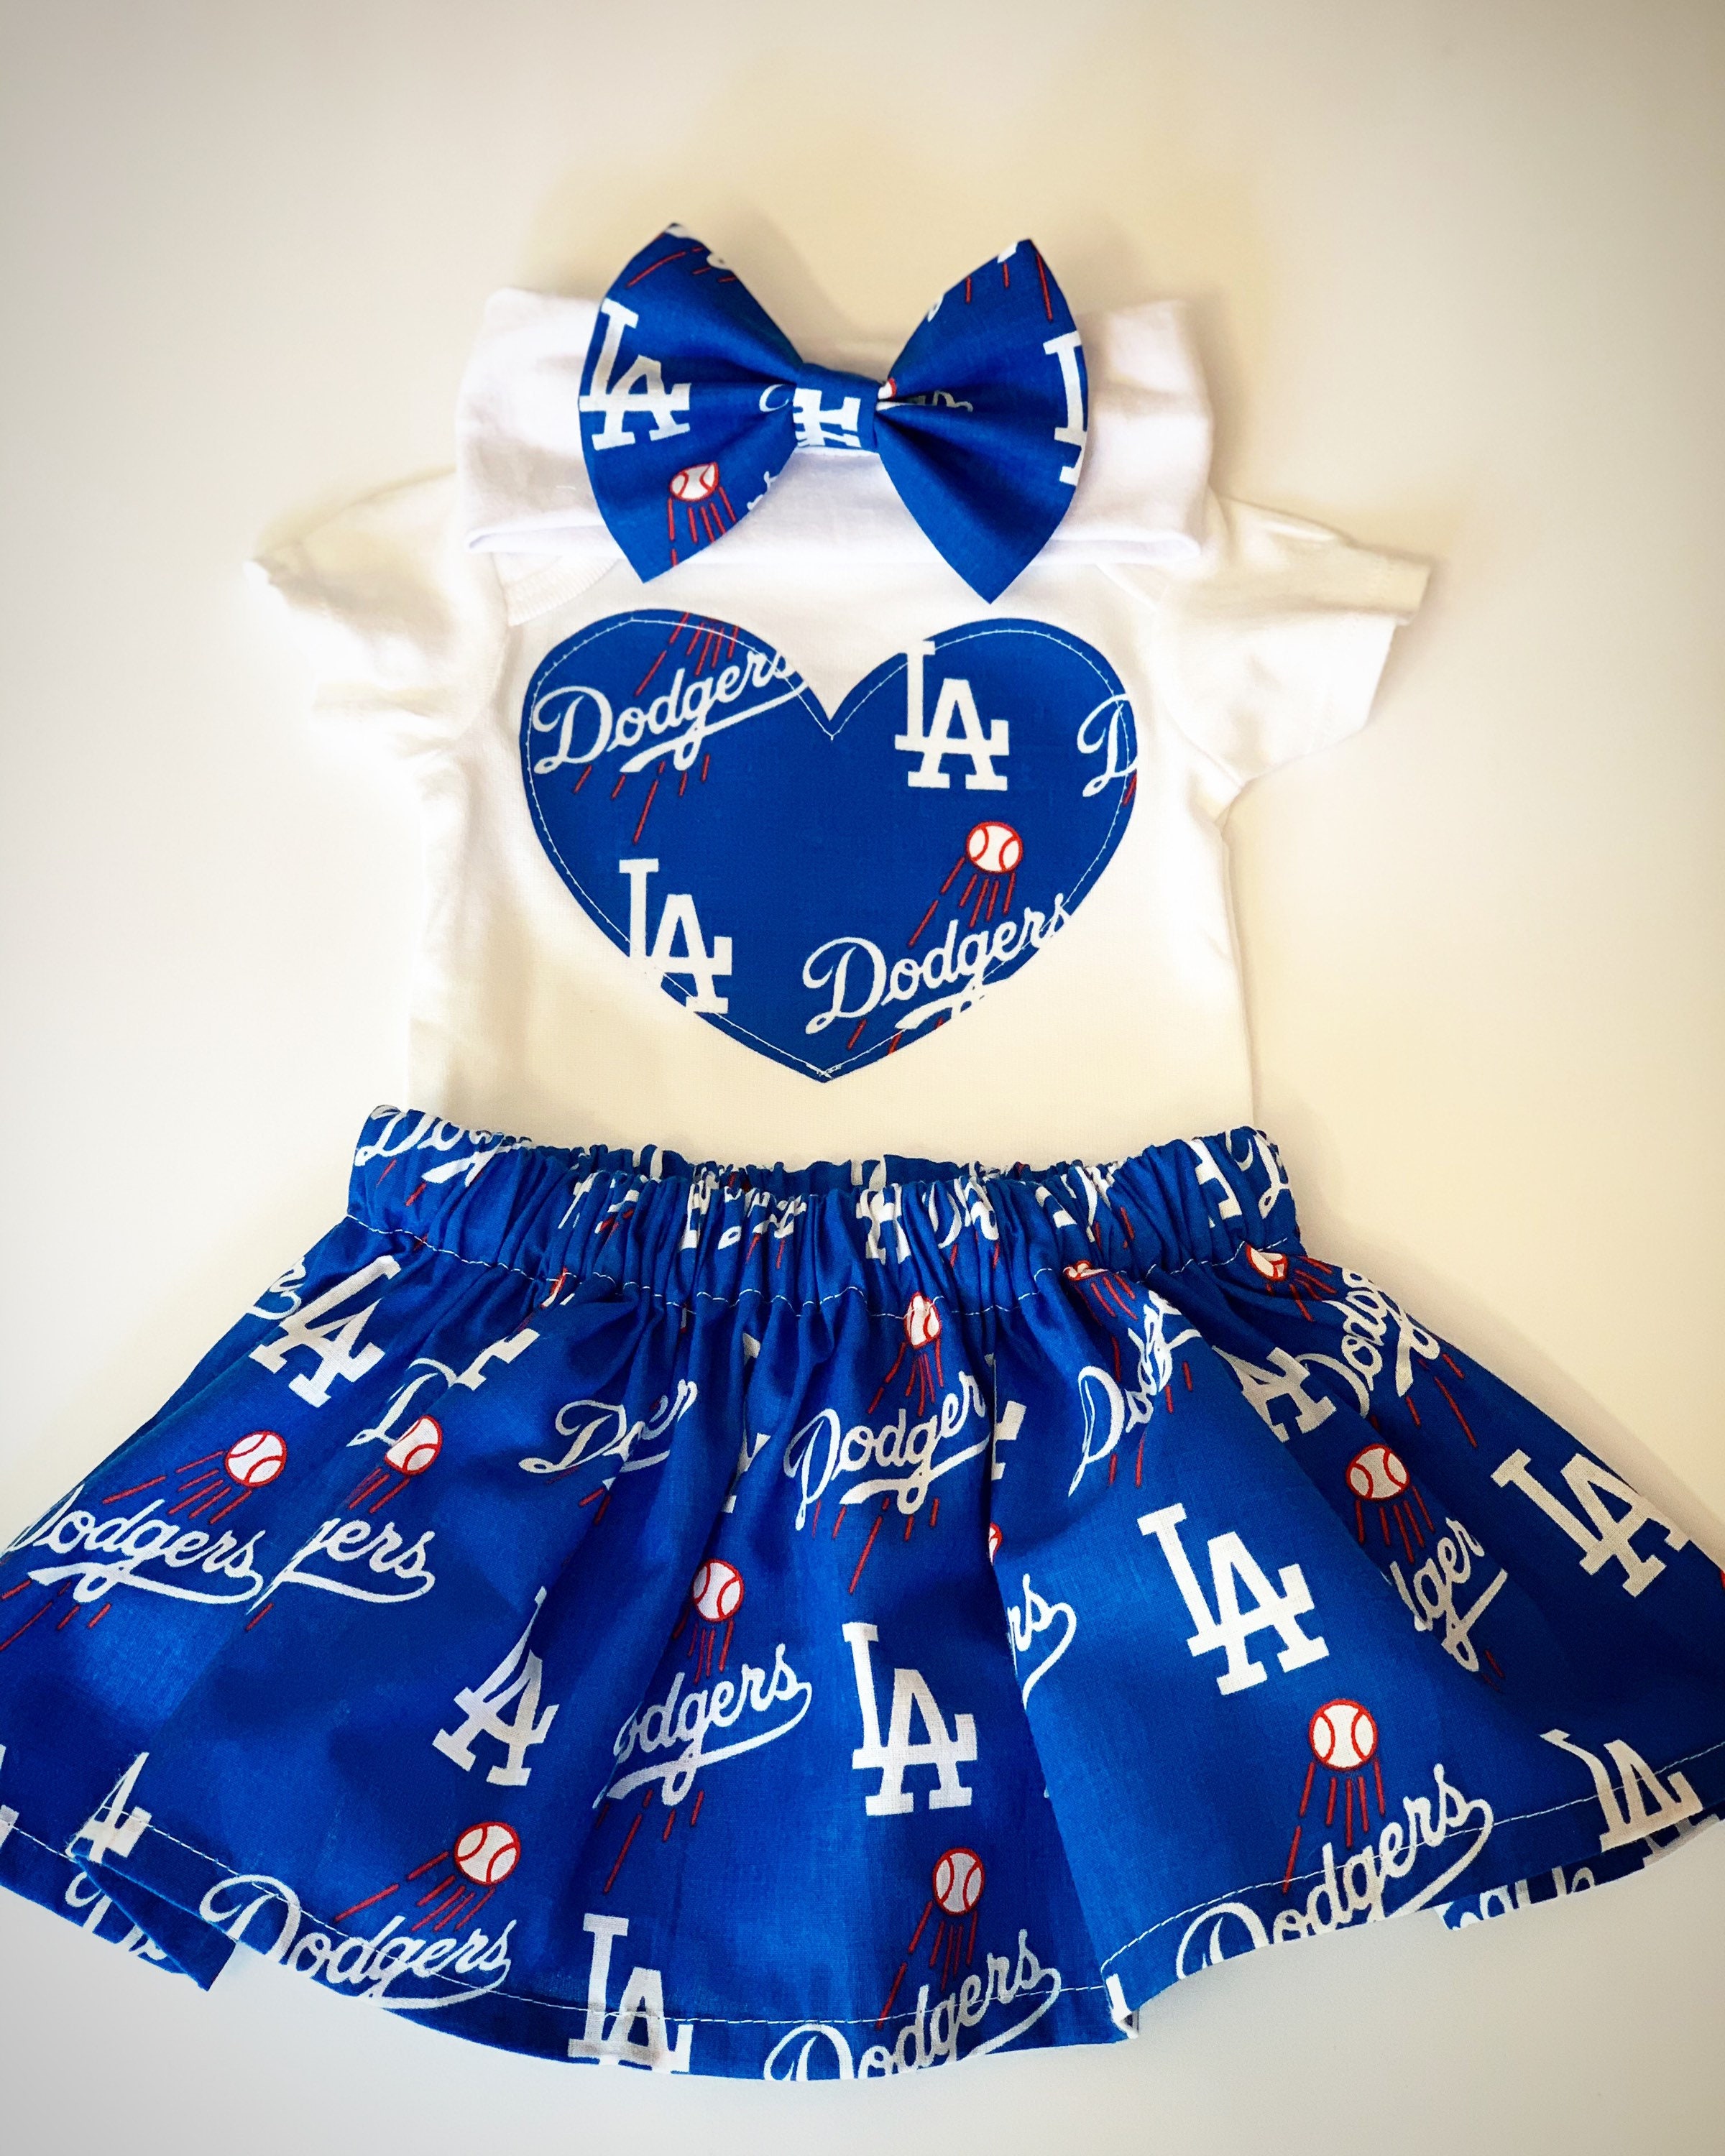 dodger game outfits